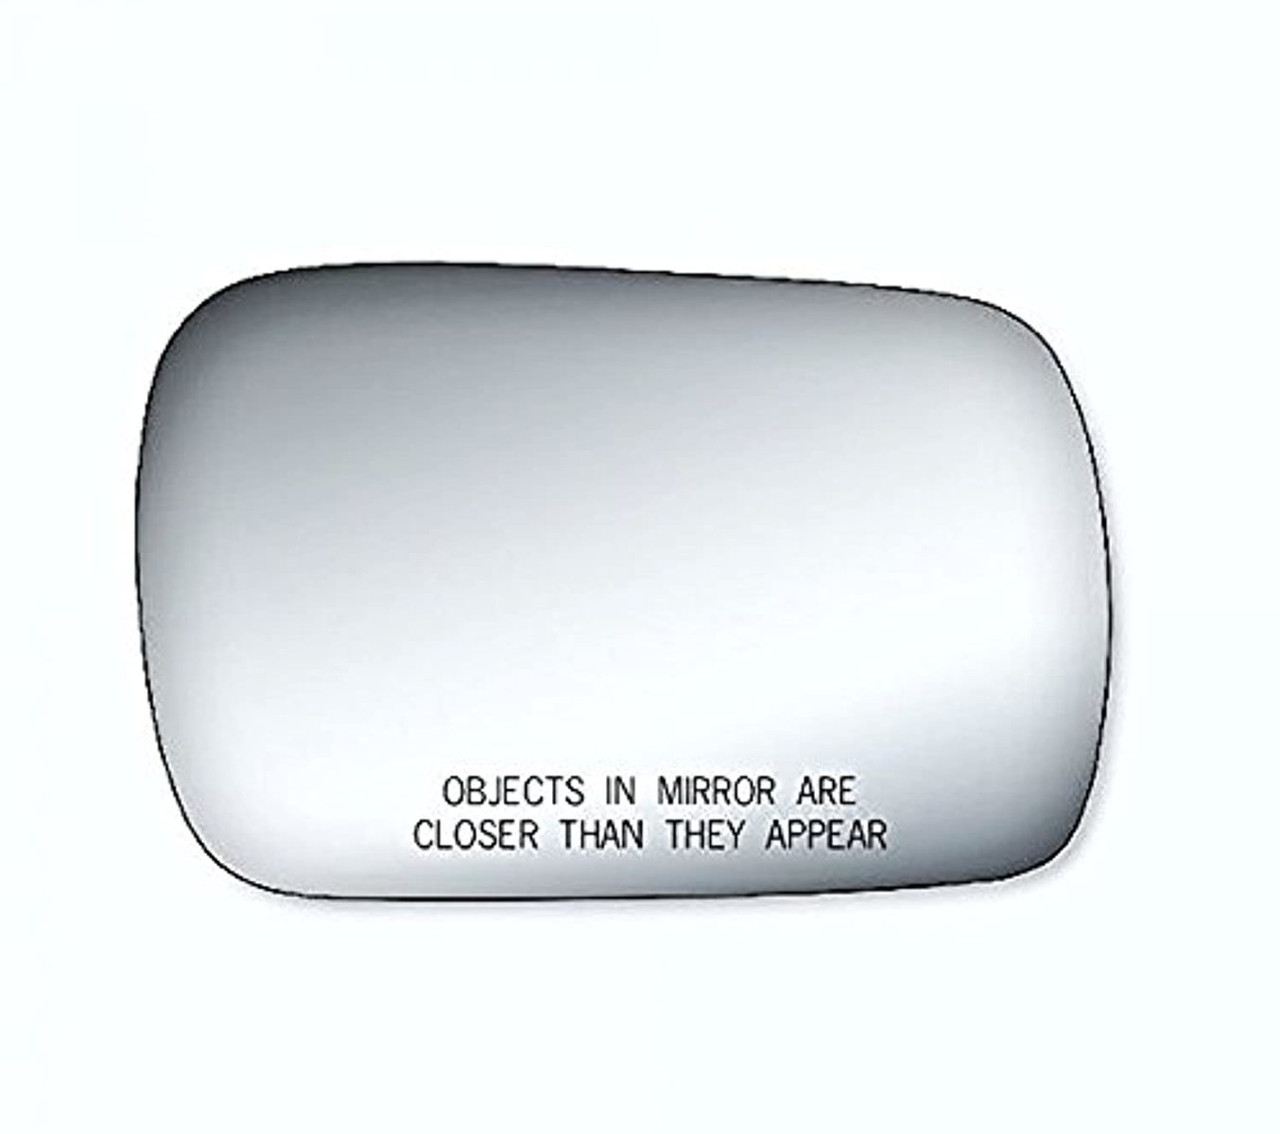 00-04 Avalon Right Passenger Convex Mirror Glass Lens w/Adhesive USA no Rear Backing Plate.